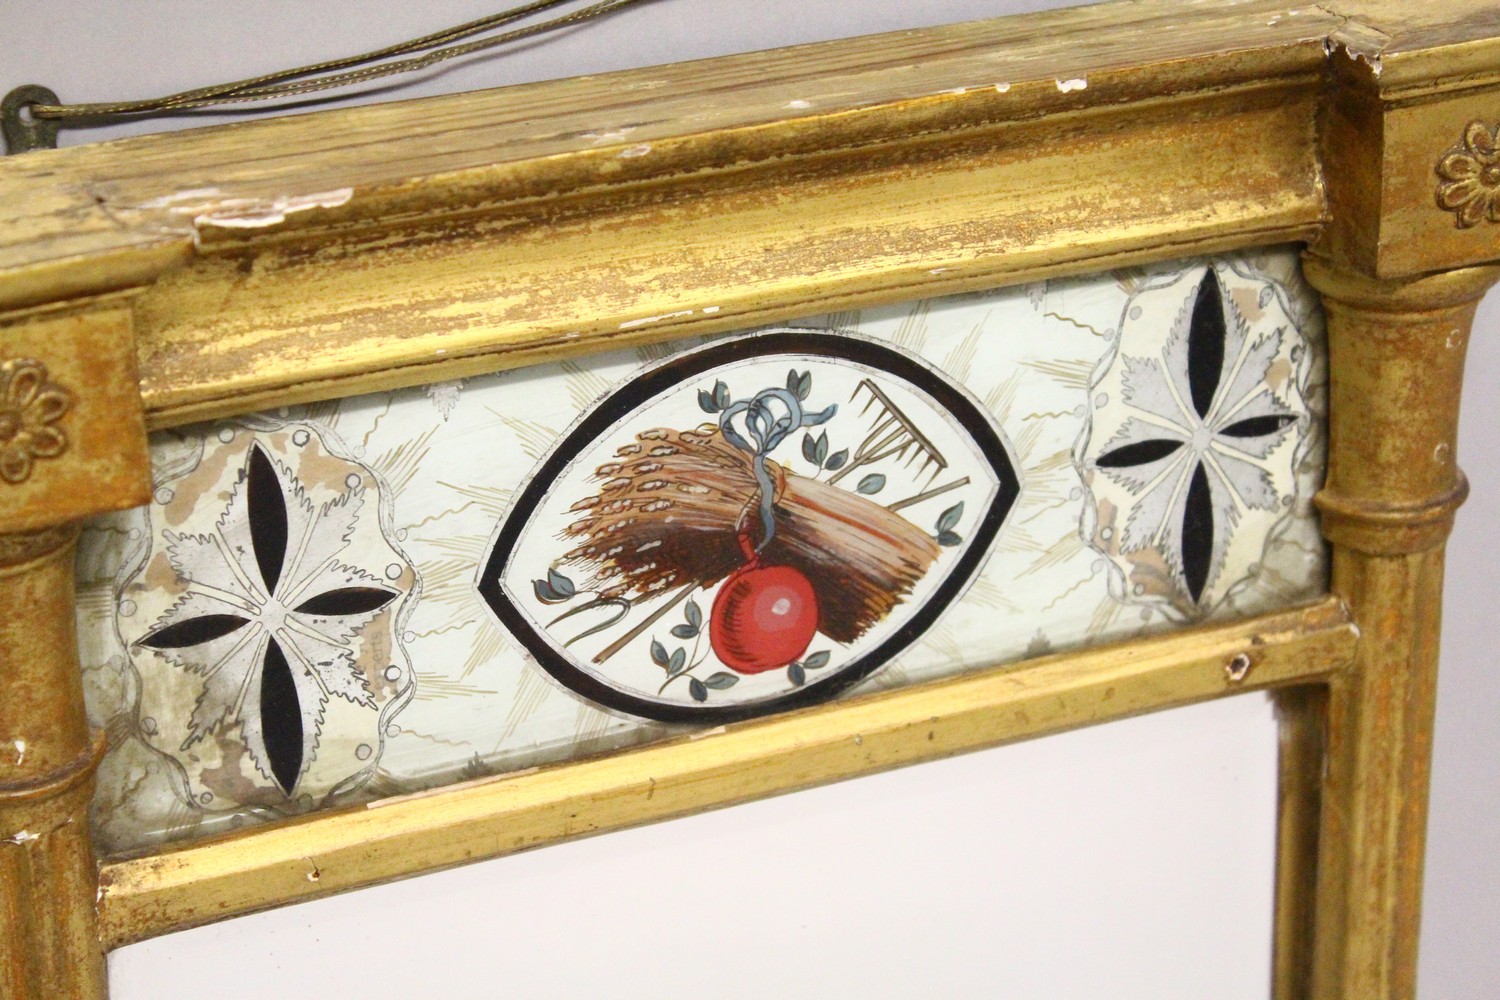 A SMALL REGENCY GILT FRAMED PIER MIRROR, with reverse painted frieze. 22.25ins high x 12.75ins - Image 2 of 5